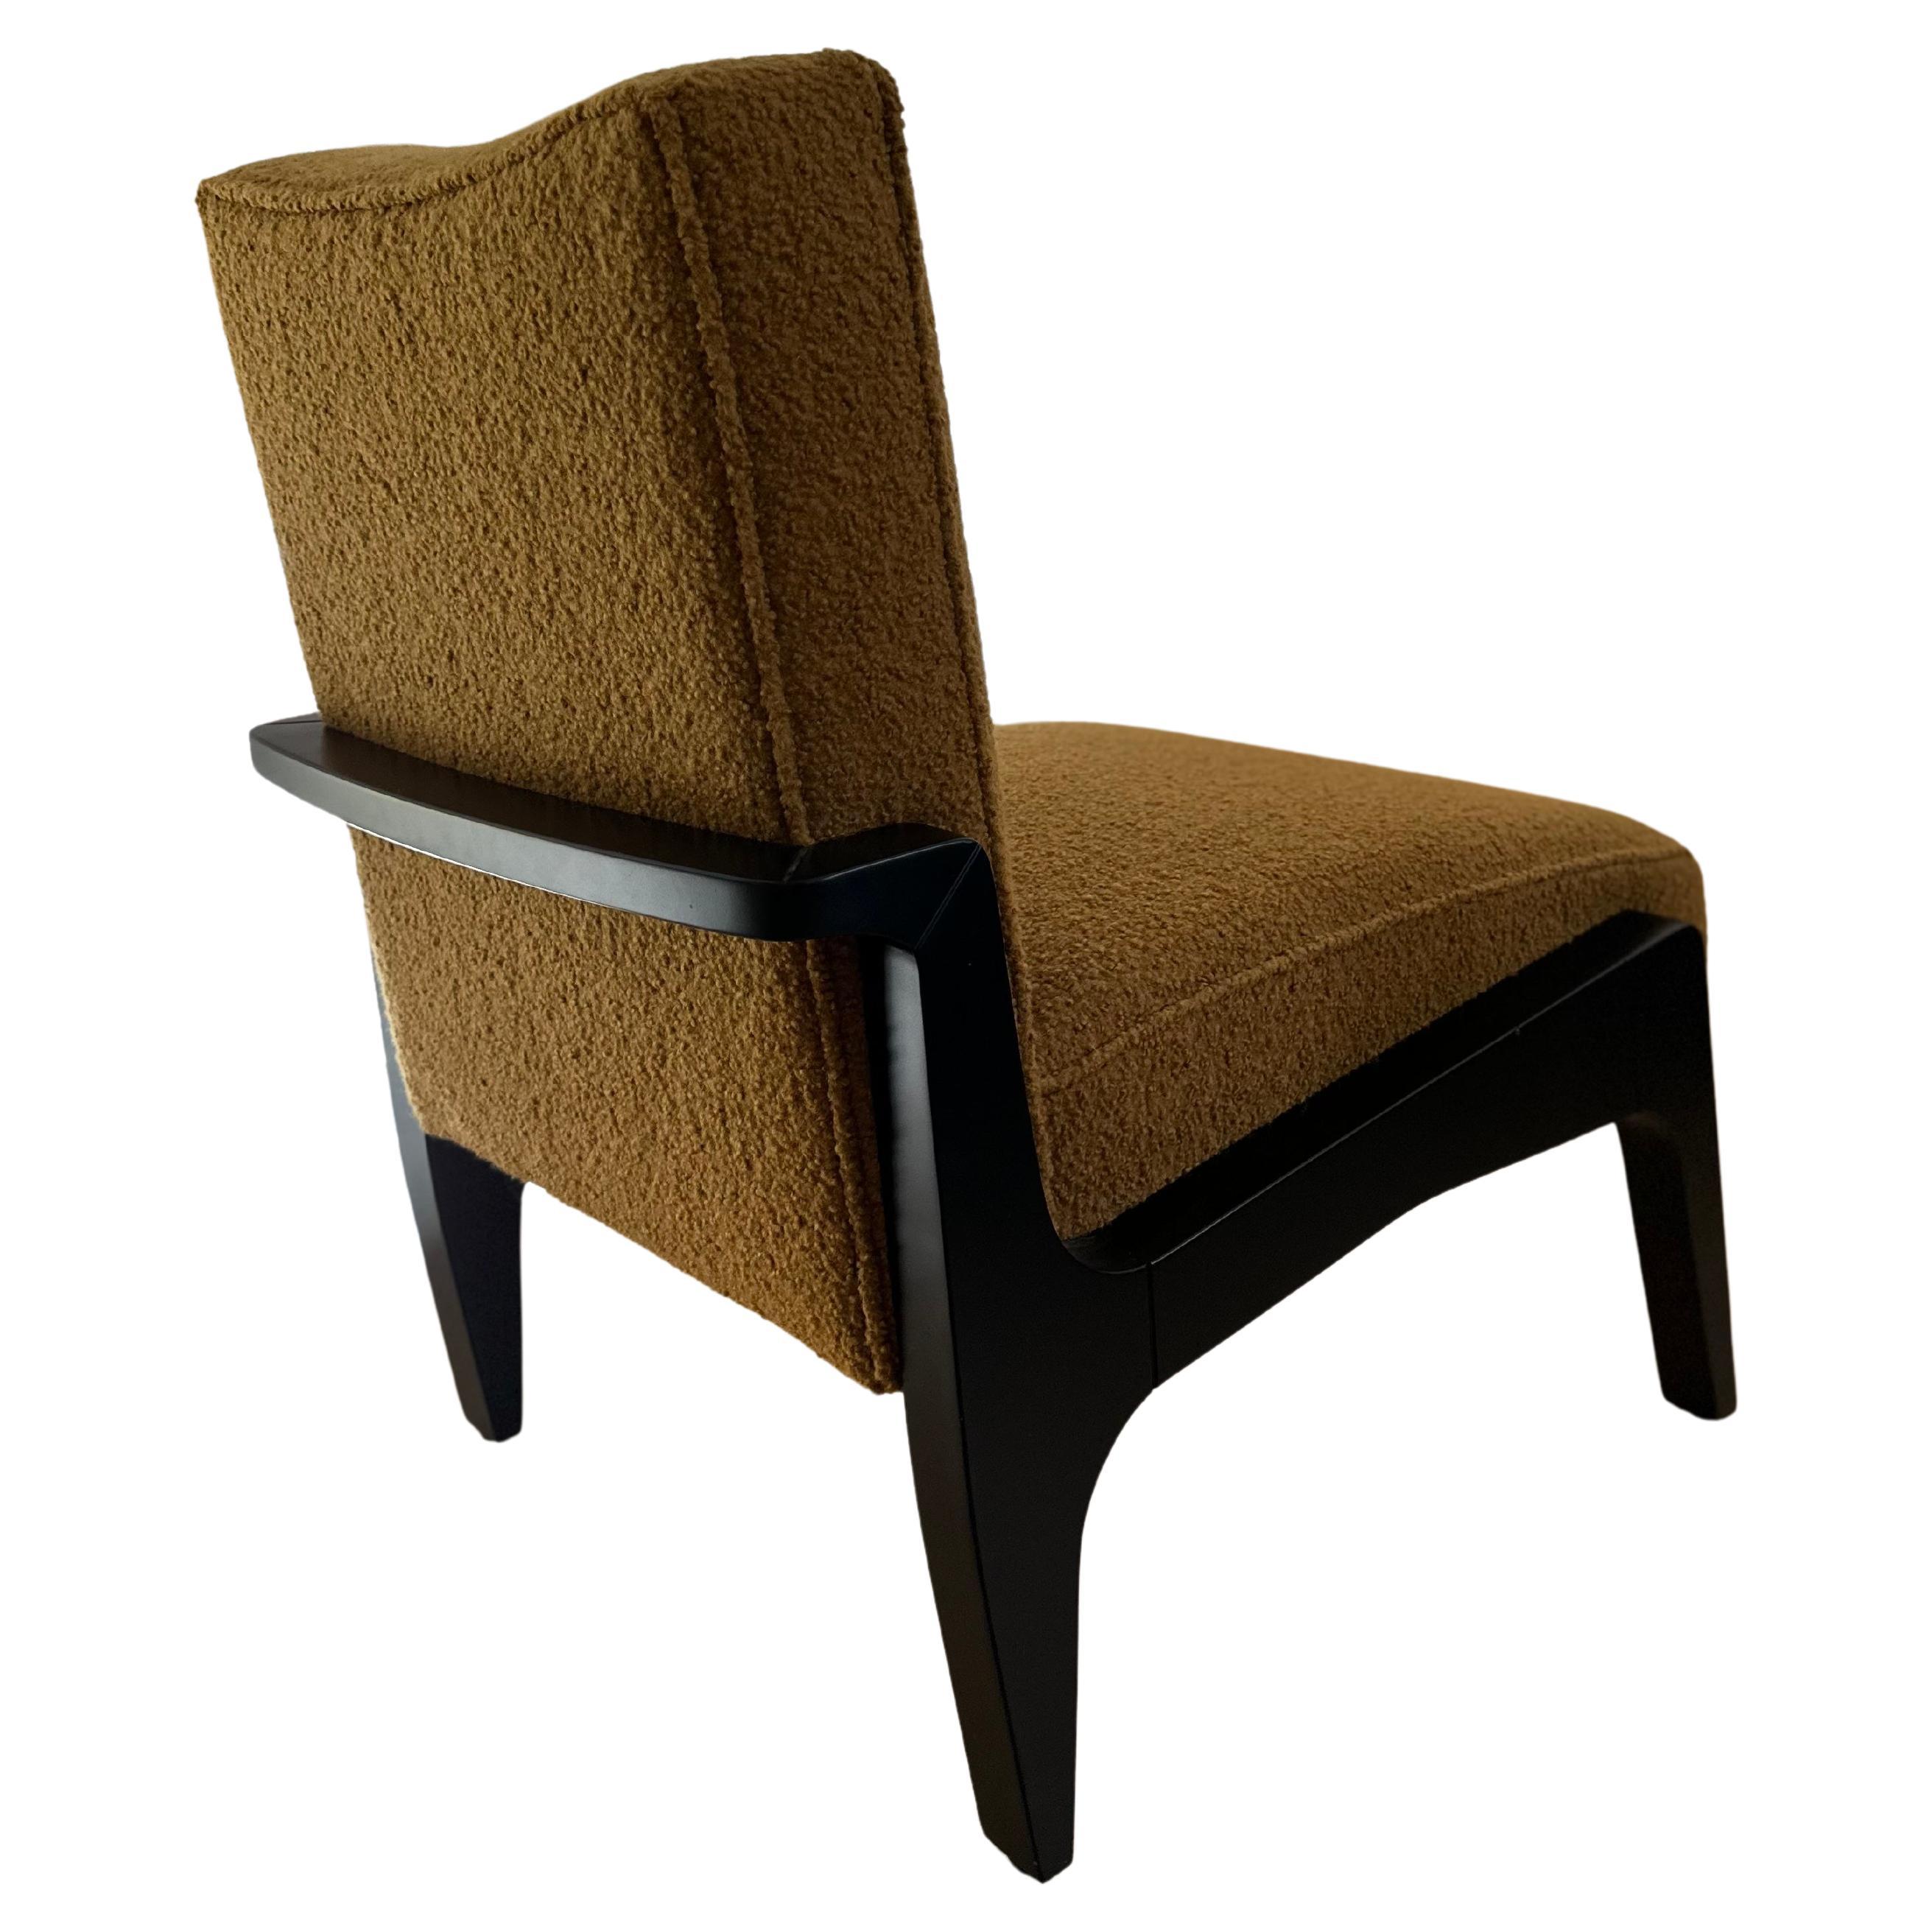 Custom Made Art Deco Inspired Atena Chair Black Ebony and Butternut Boucle For Sale